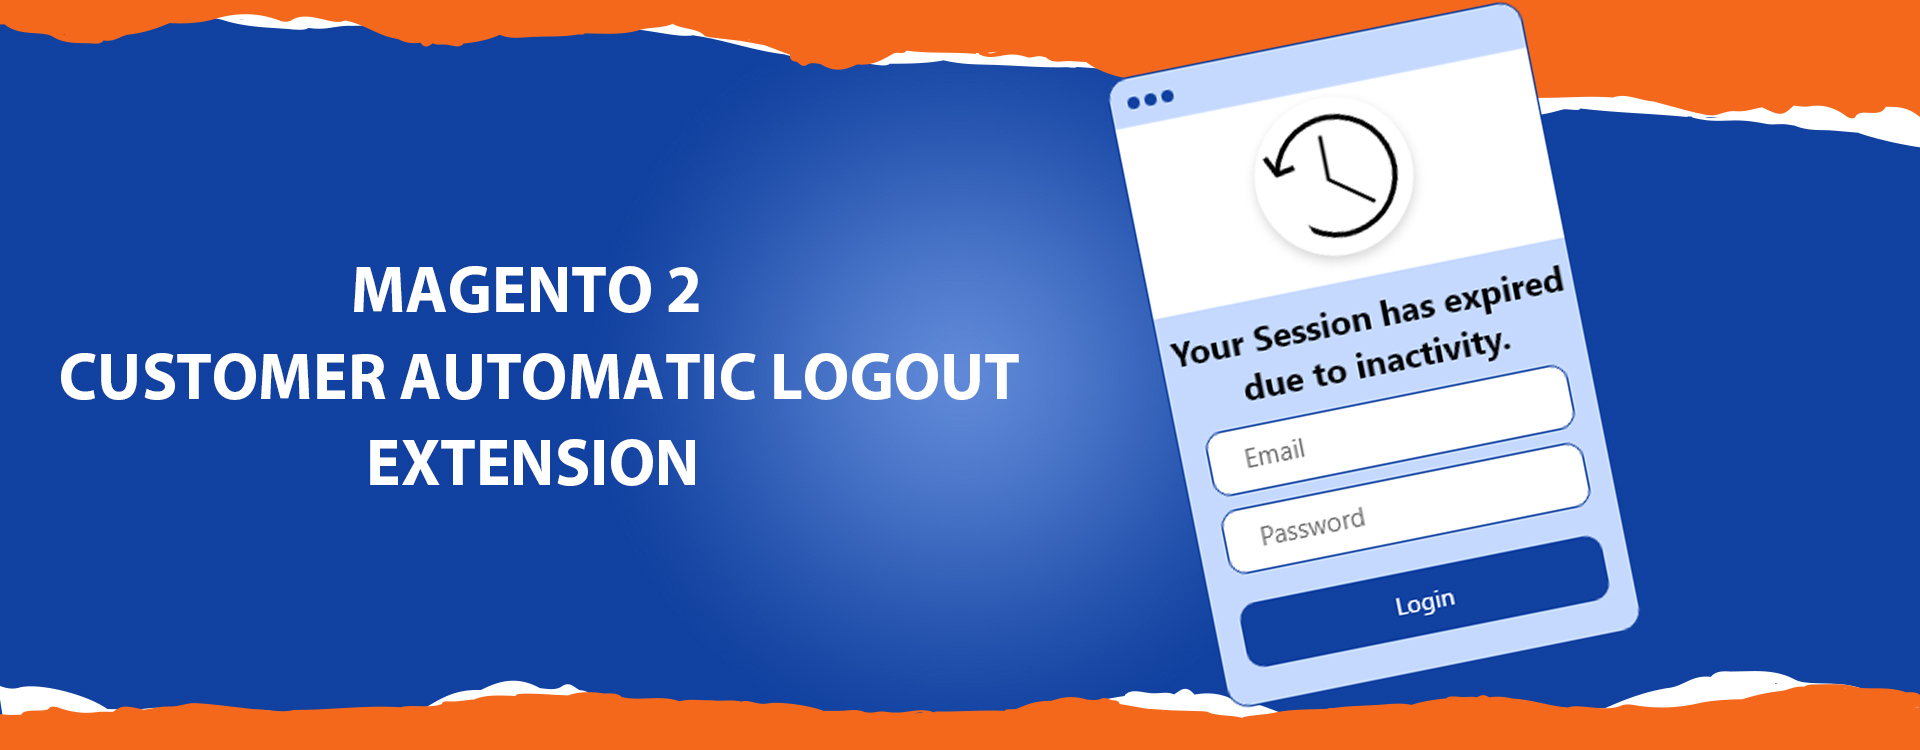 Customer automatic logout extension for Magento 2